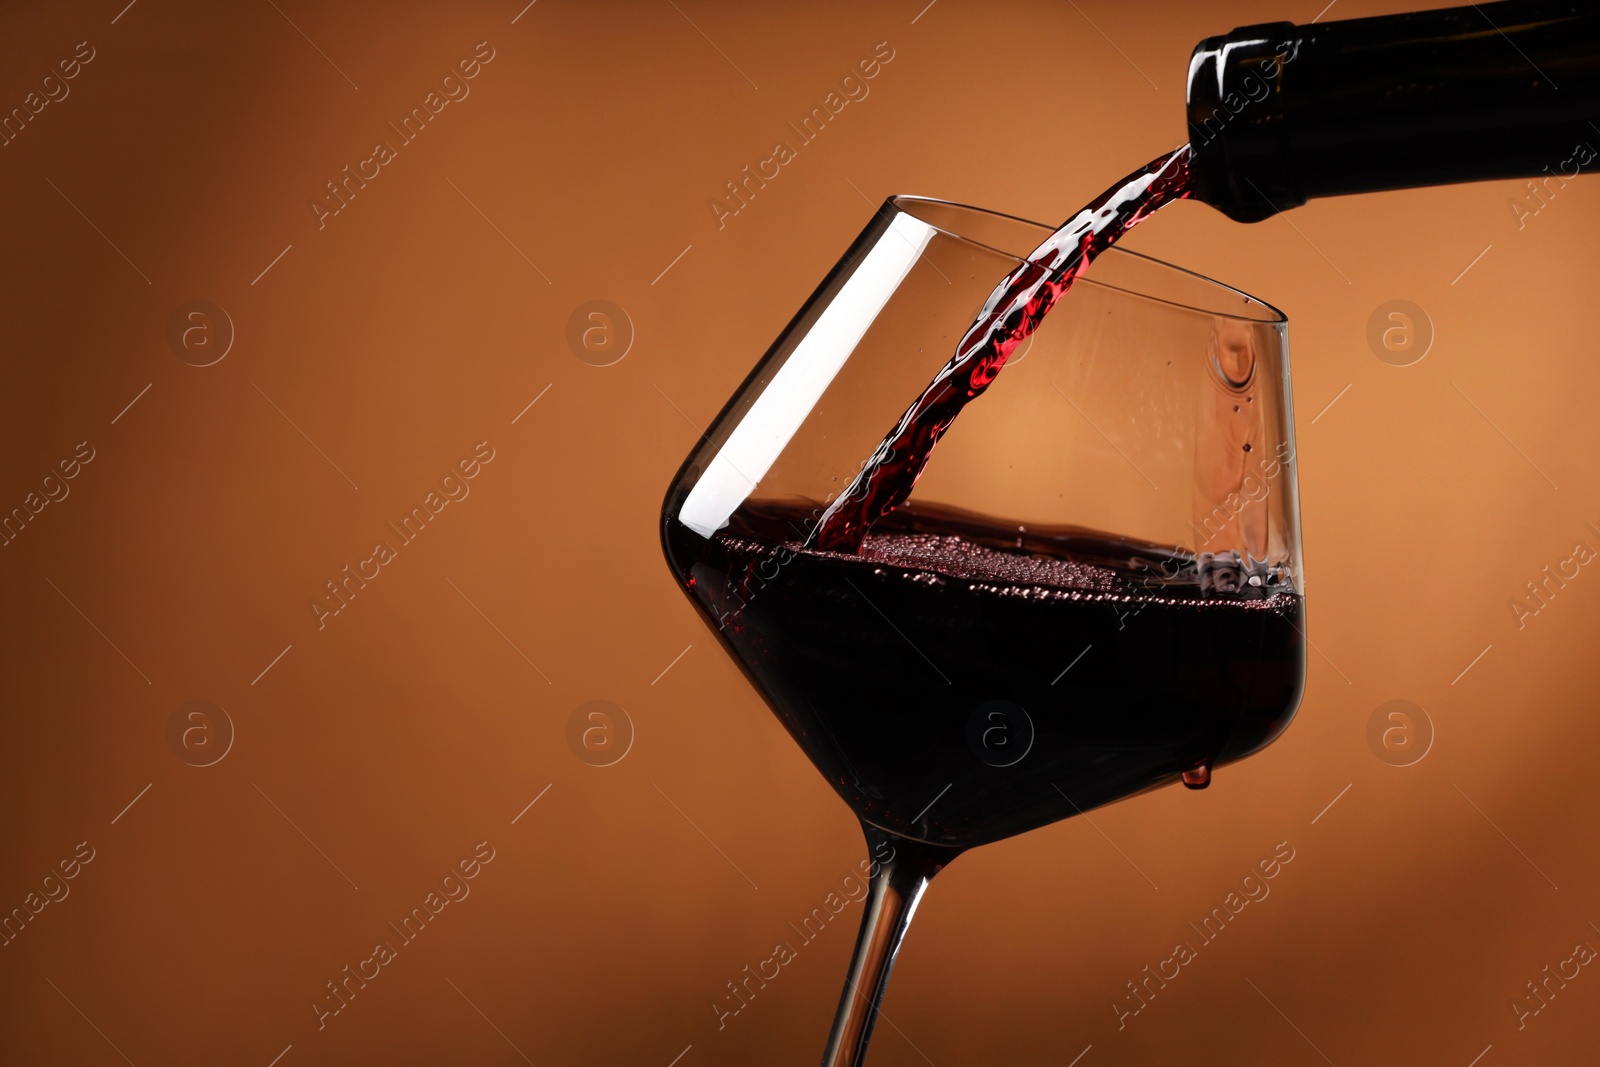 Photo of Pouring red wine into glass and bottles against brick wall background, closeup